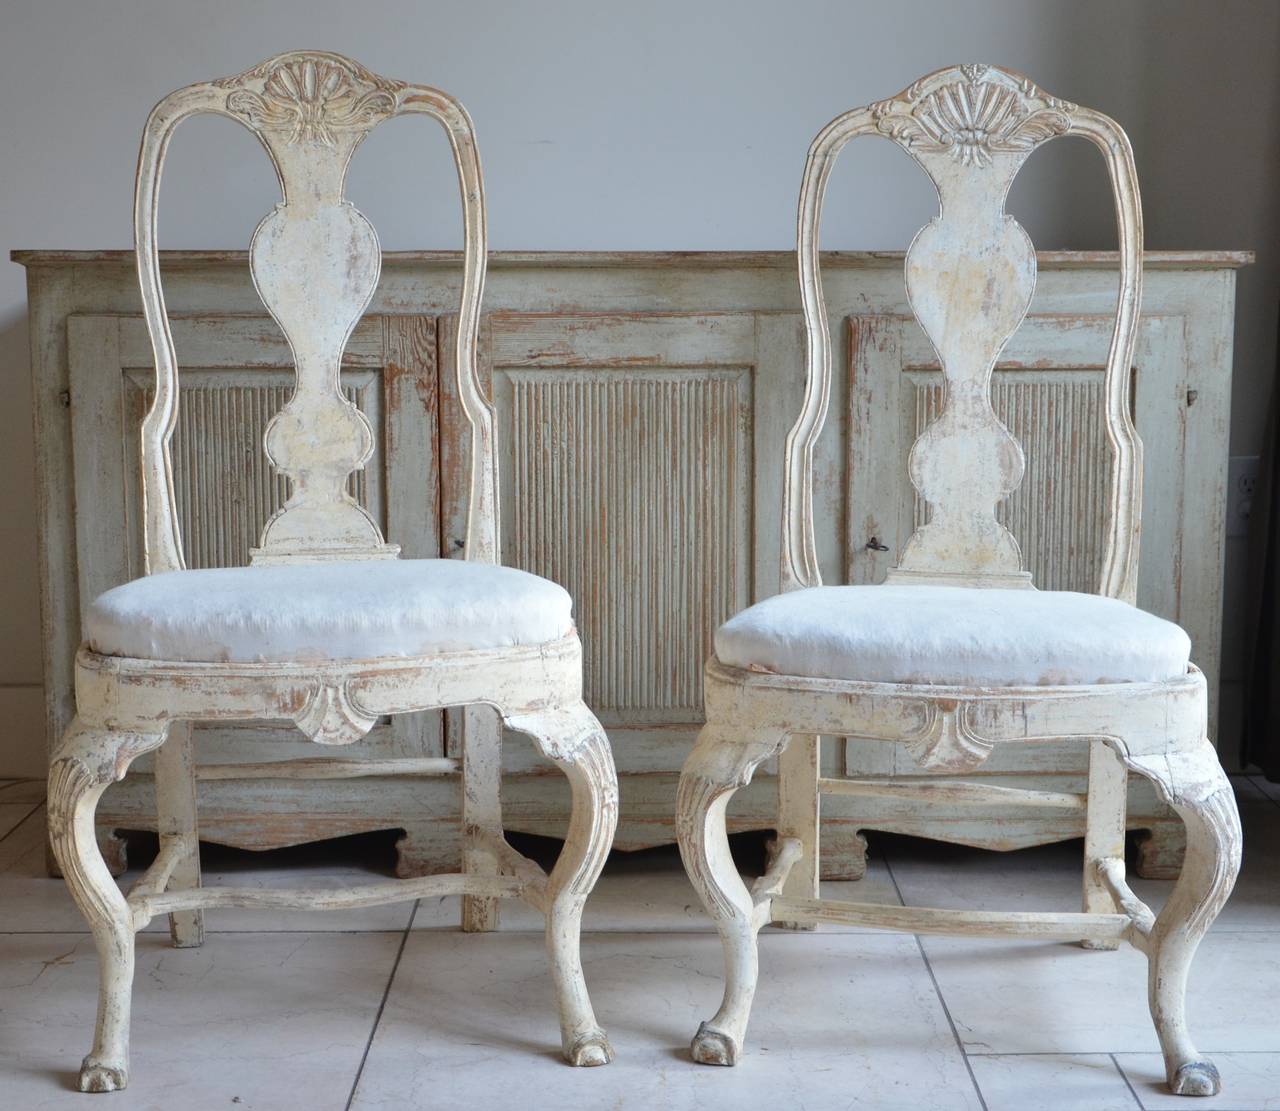 Pair of 18th century Swedish chairs, in Rococo period circa 1760 with rocaille carving on the seat rails and pierced splats. Hand scraped back to traces of their original worn cream paint.
Lovengly hand made and just with little difference in